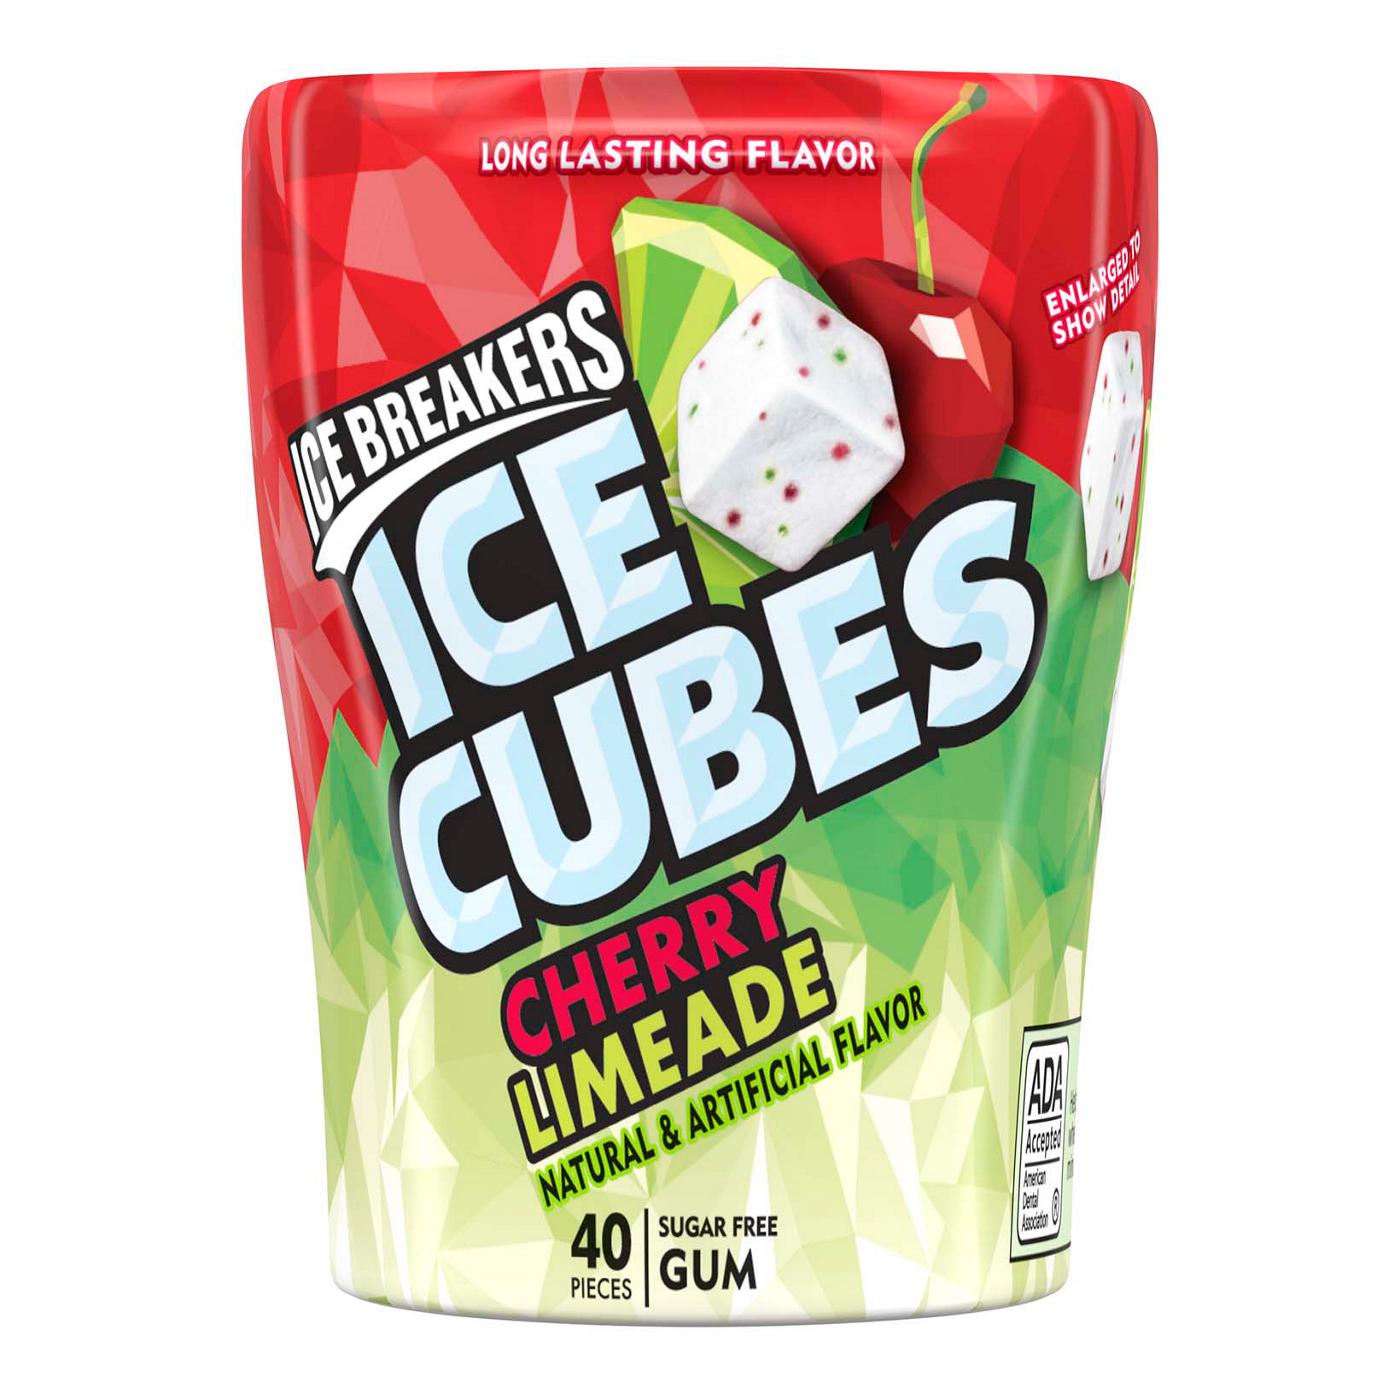 Ice Breakers Ice Cubes Cherry Limeade Sugar Free Gum; image 1 of 4